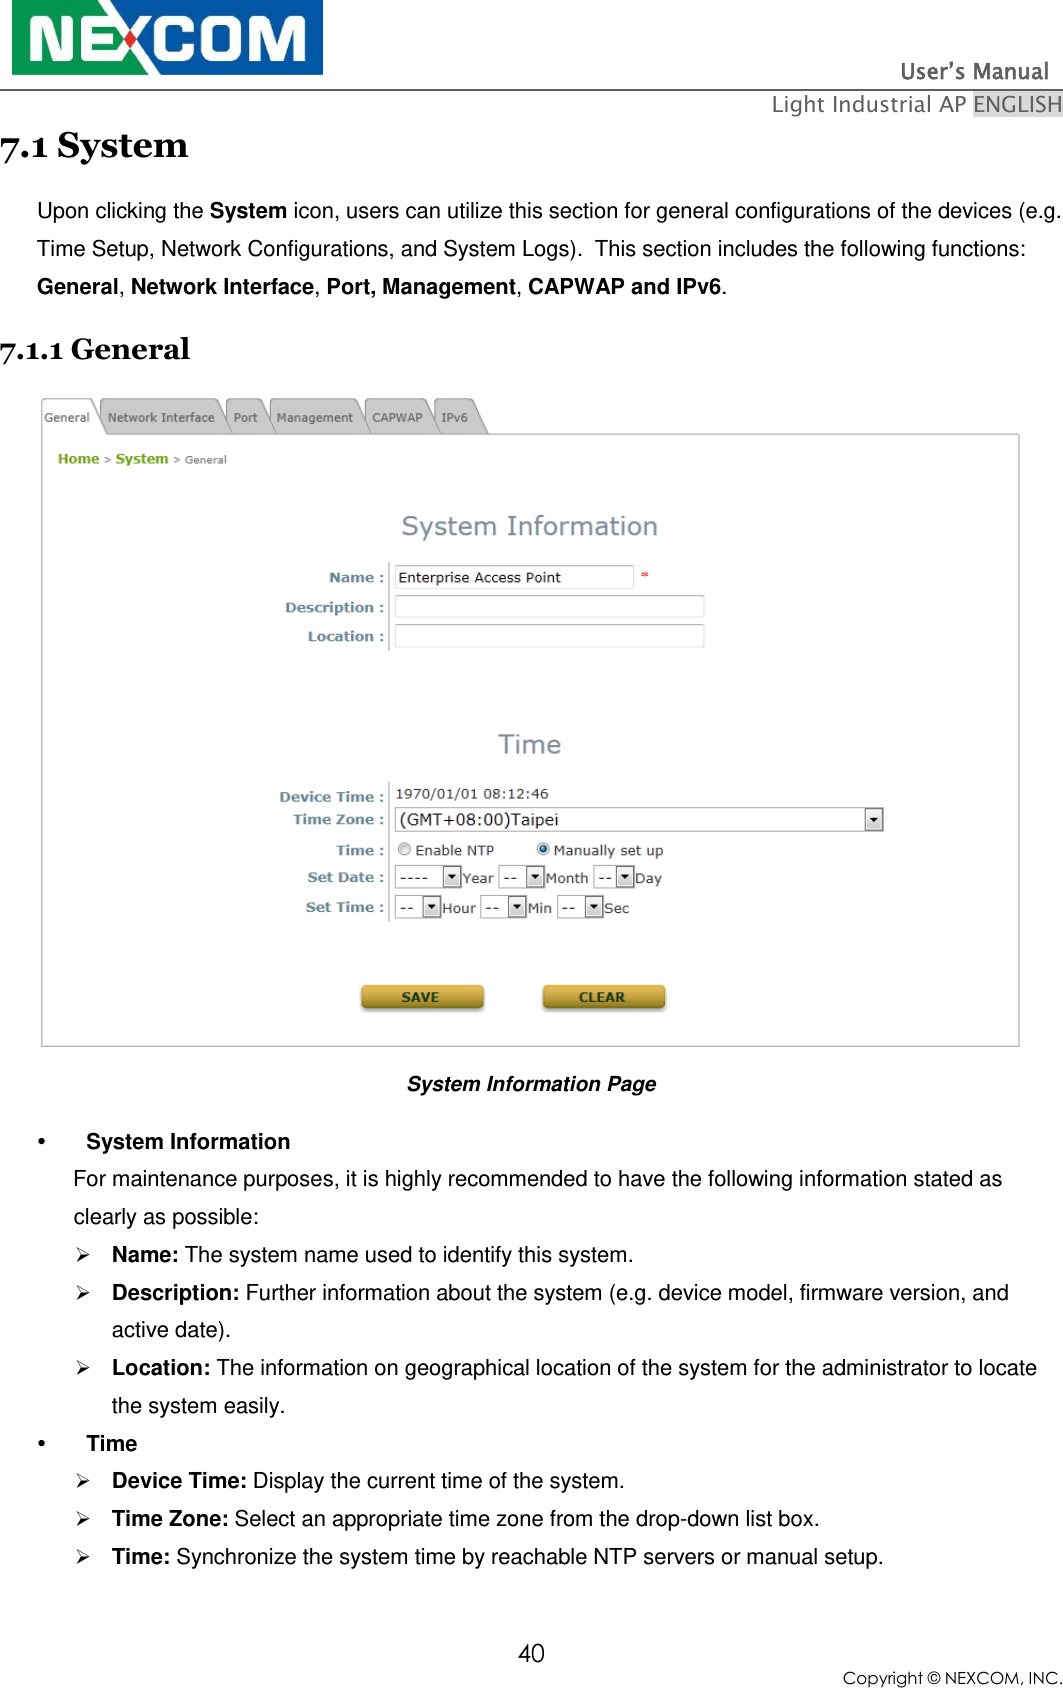                                                                          User’s Manual   Light Industrial AP ENGLISH 40 Copyright © NEXCOM, INC. 7.1 System  Upon clicking the System icon, users can utilize this section for general configurations of the devices (e.g. Time Setup, Network Configurations, and System Logs).  This section includes the following functions: General, Network Interface, Port, Management, CAPWAP and IPv6. 7.1.1 General  System Information Page  System Information       For maintenance purposes, it is highly recommended to have the following information stated as clearly as possible:  Name: The system name used to identify this system.  Description: Further information about the system (e.g. device model, firmware version, and active date).  Location: The information on geographical location of the system for the administrator to locate the system easily.  Time  Device Time: Display the current time of the system.  Time Zone: Select an appropriate time zone from the drop-down list box.  Time: Synchronize the system time by reachable NTP servers or manual setup. 